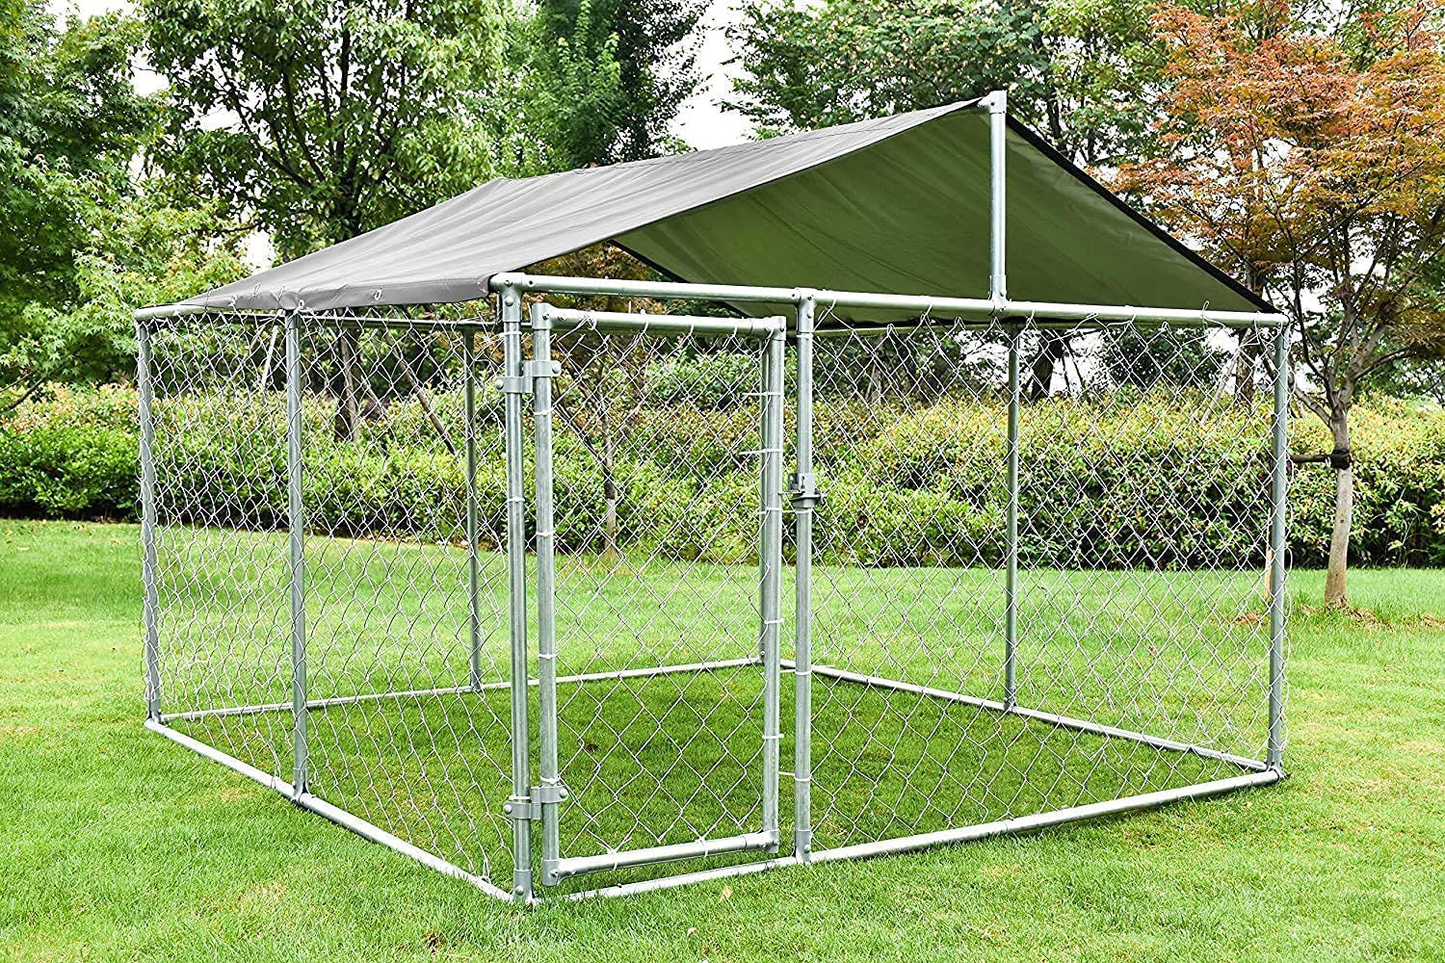 MAGIC UNION Dog Kennel Dog Fence Outdoor Metal Dog Cage outside Dog Run House Pet Enclosure Fencing with Water-Resistant Cover Roof Backyard Dog Play Pen